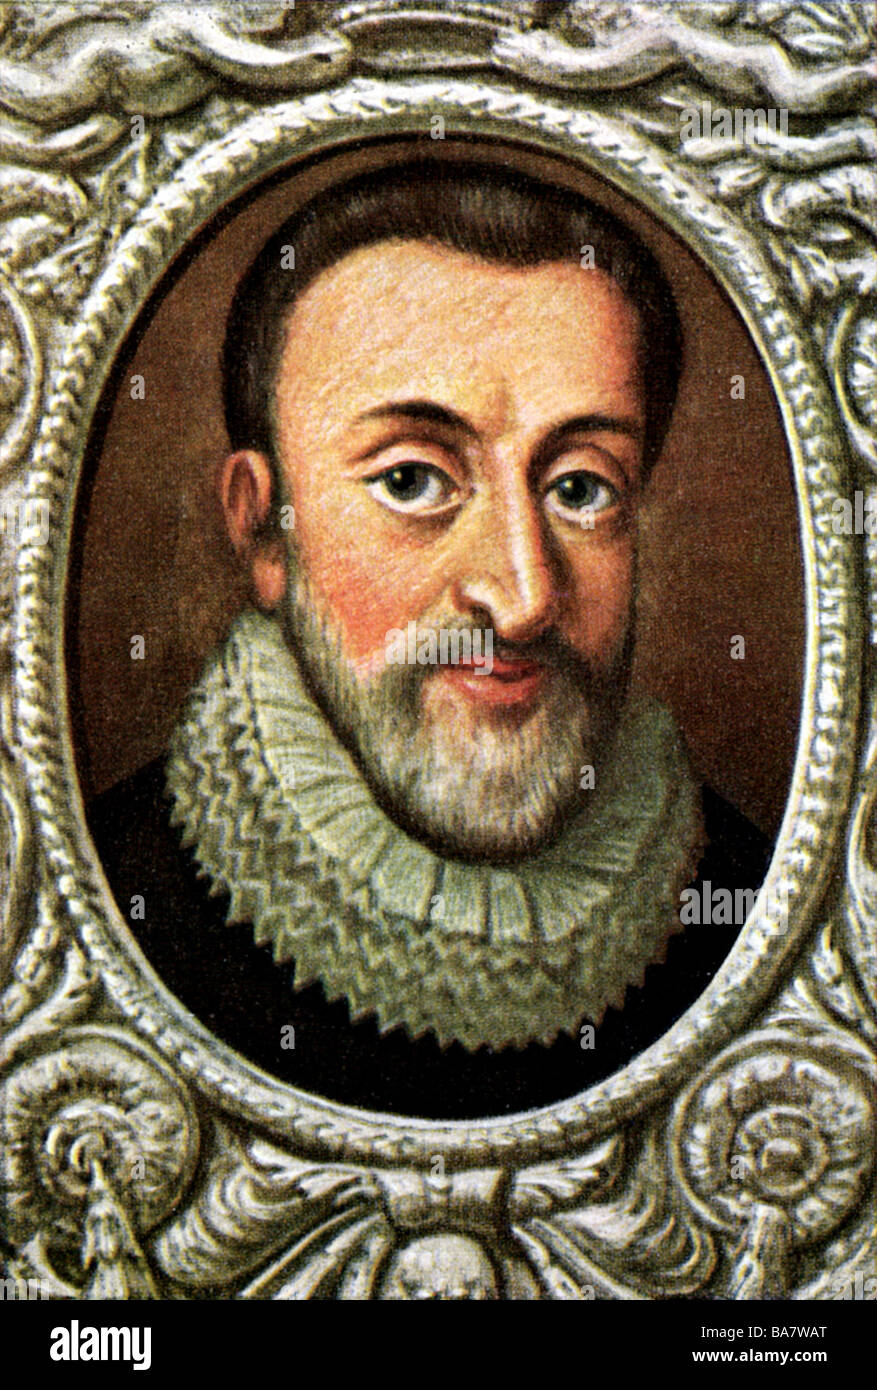 Henry IV, 13.12.1553 - 14.5.1610, King of France 27.2.1594 - 14.5.1610, portrait, print after miniature, 17th century, cigarette card, Germany, 1933, , Stock Photo